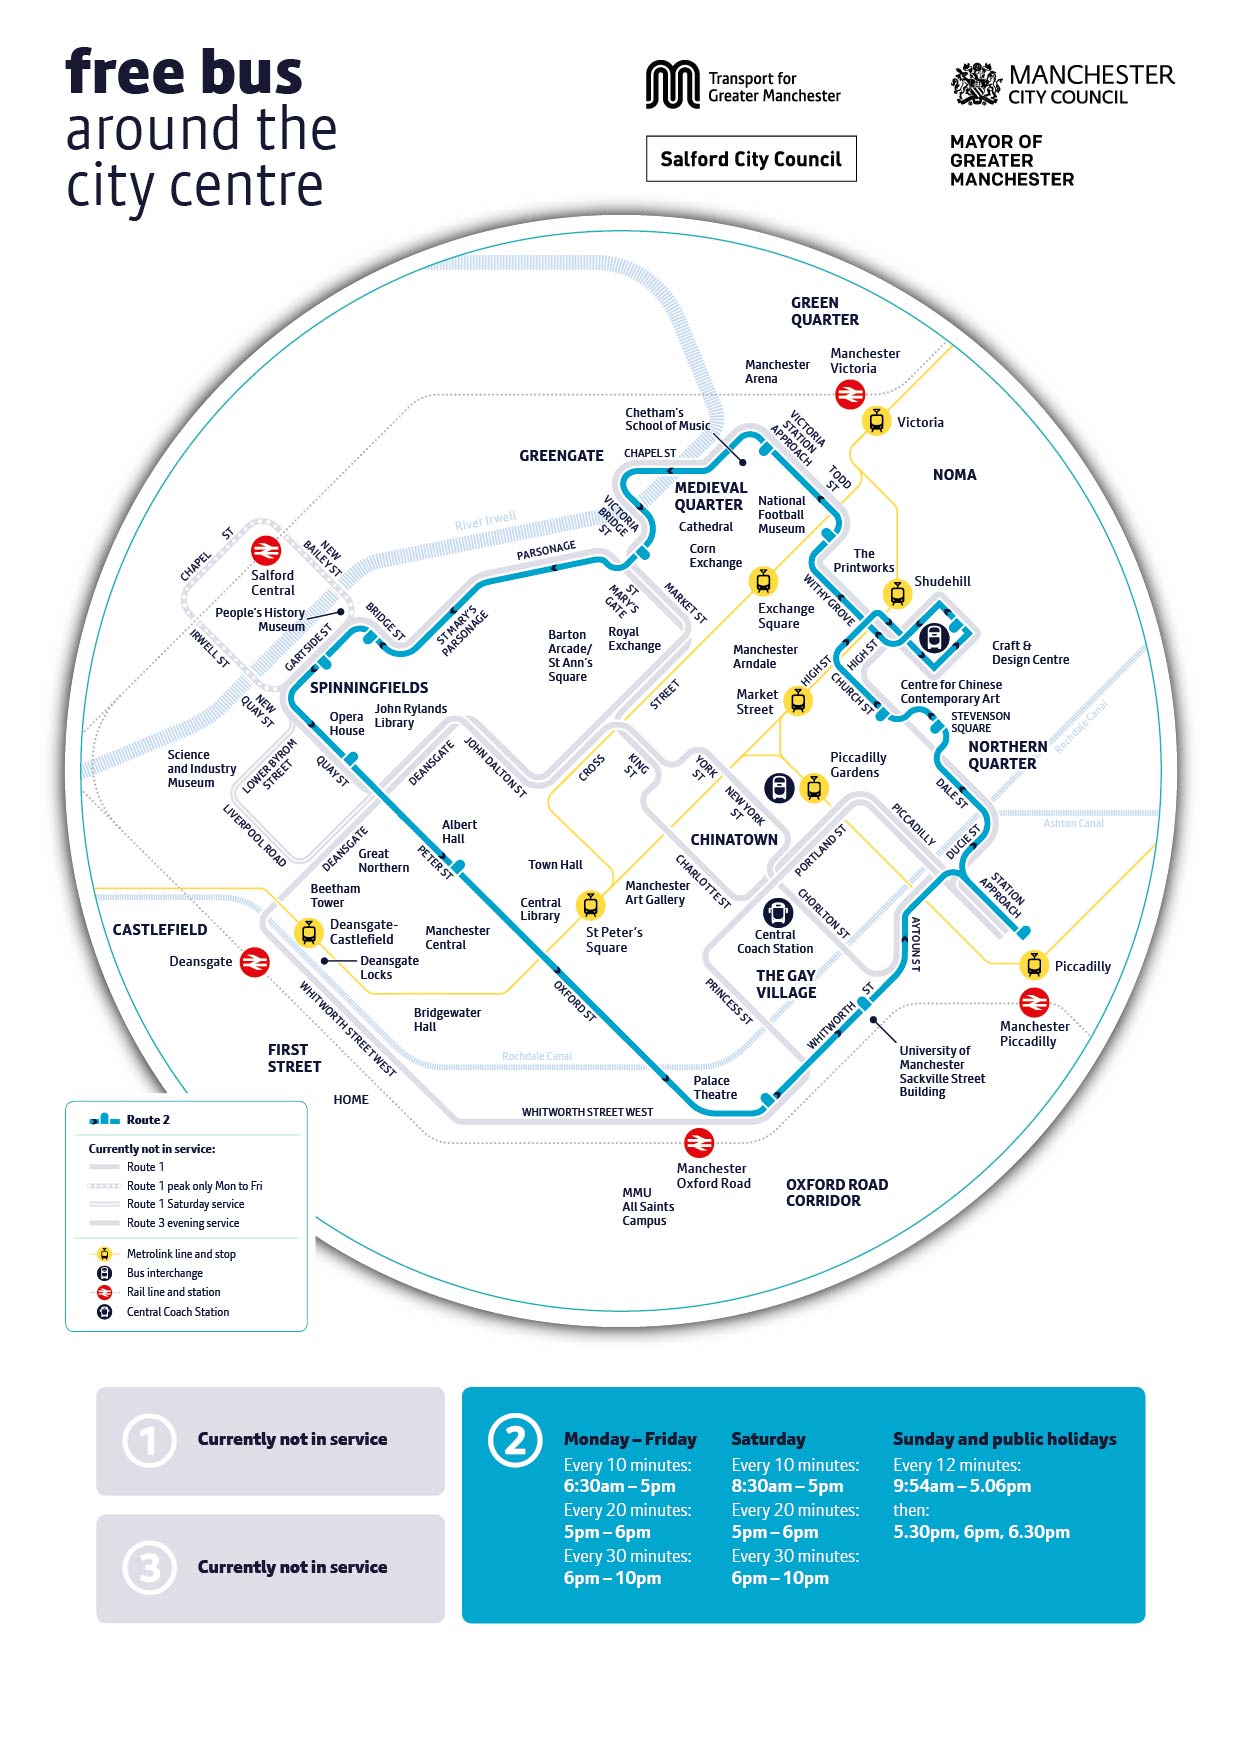 free bus – free travel around Manchester city centre | Transport for ...